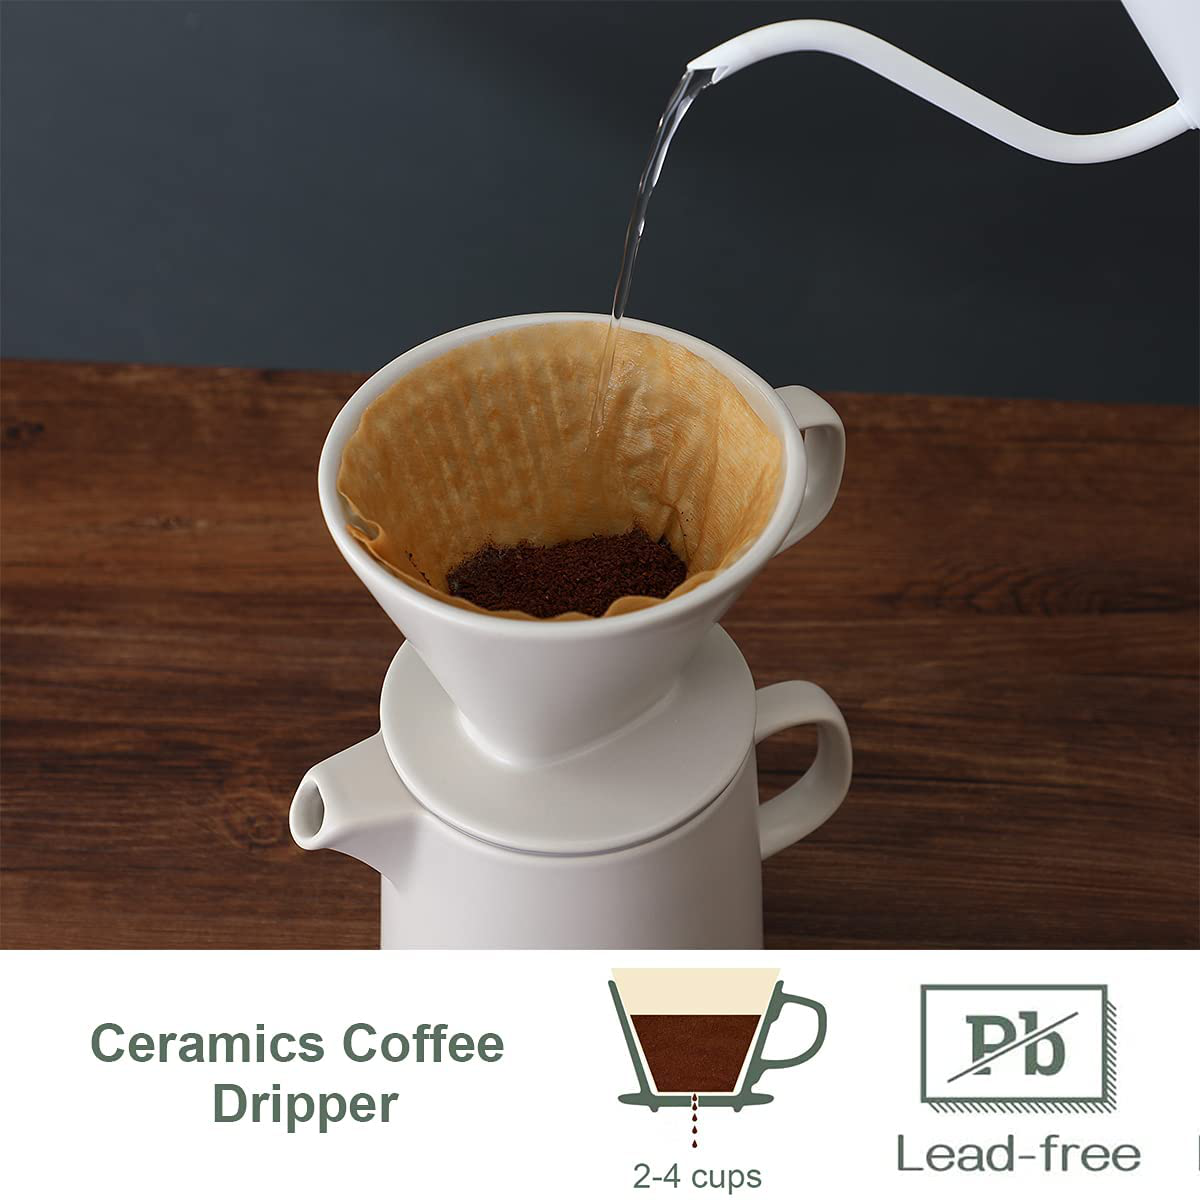 Coffee Maker Press Coffee Maker With Hand Coffee Pot Set Ceramic Coffee Filter Cup Drip Coffee Hand Pot-850Ml (white)